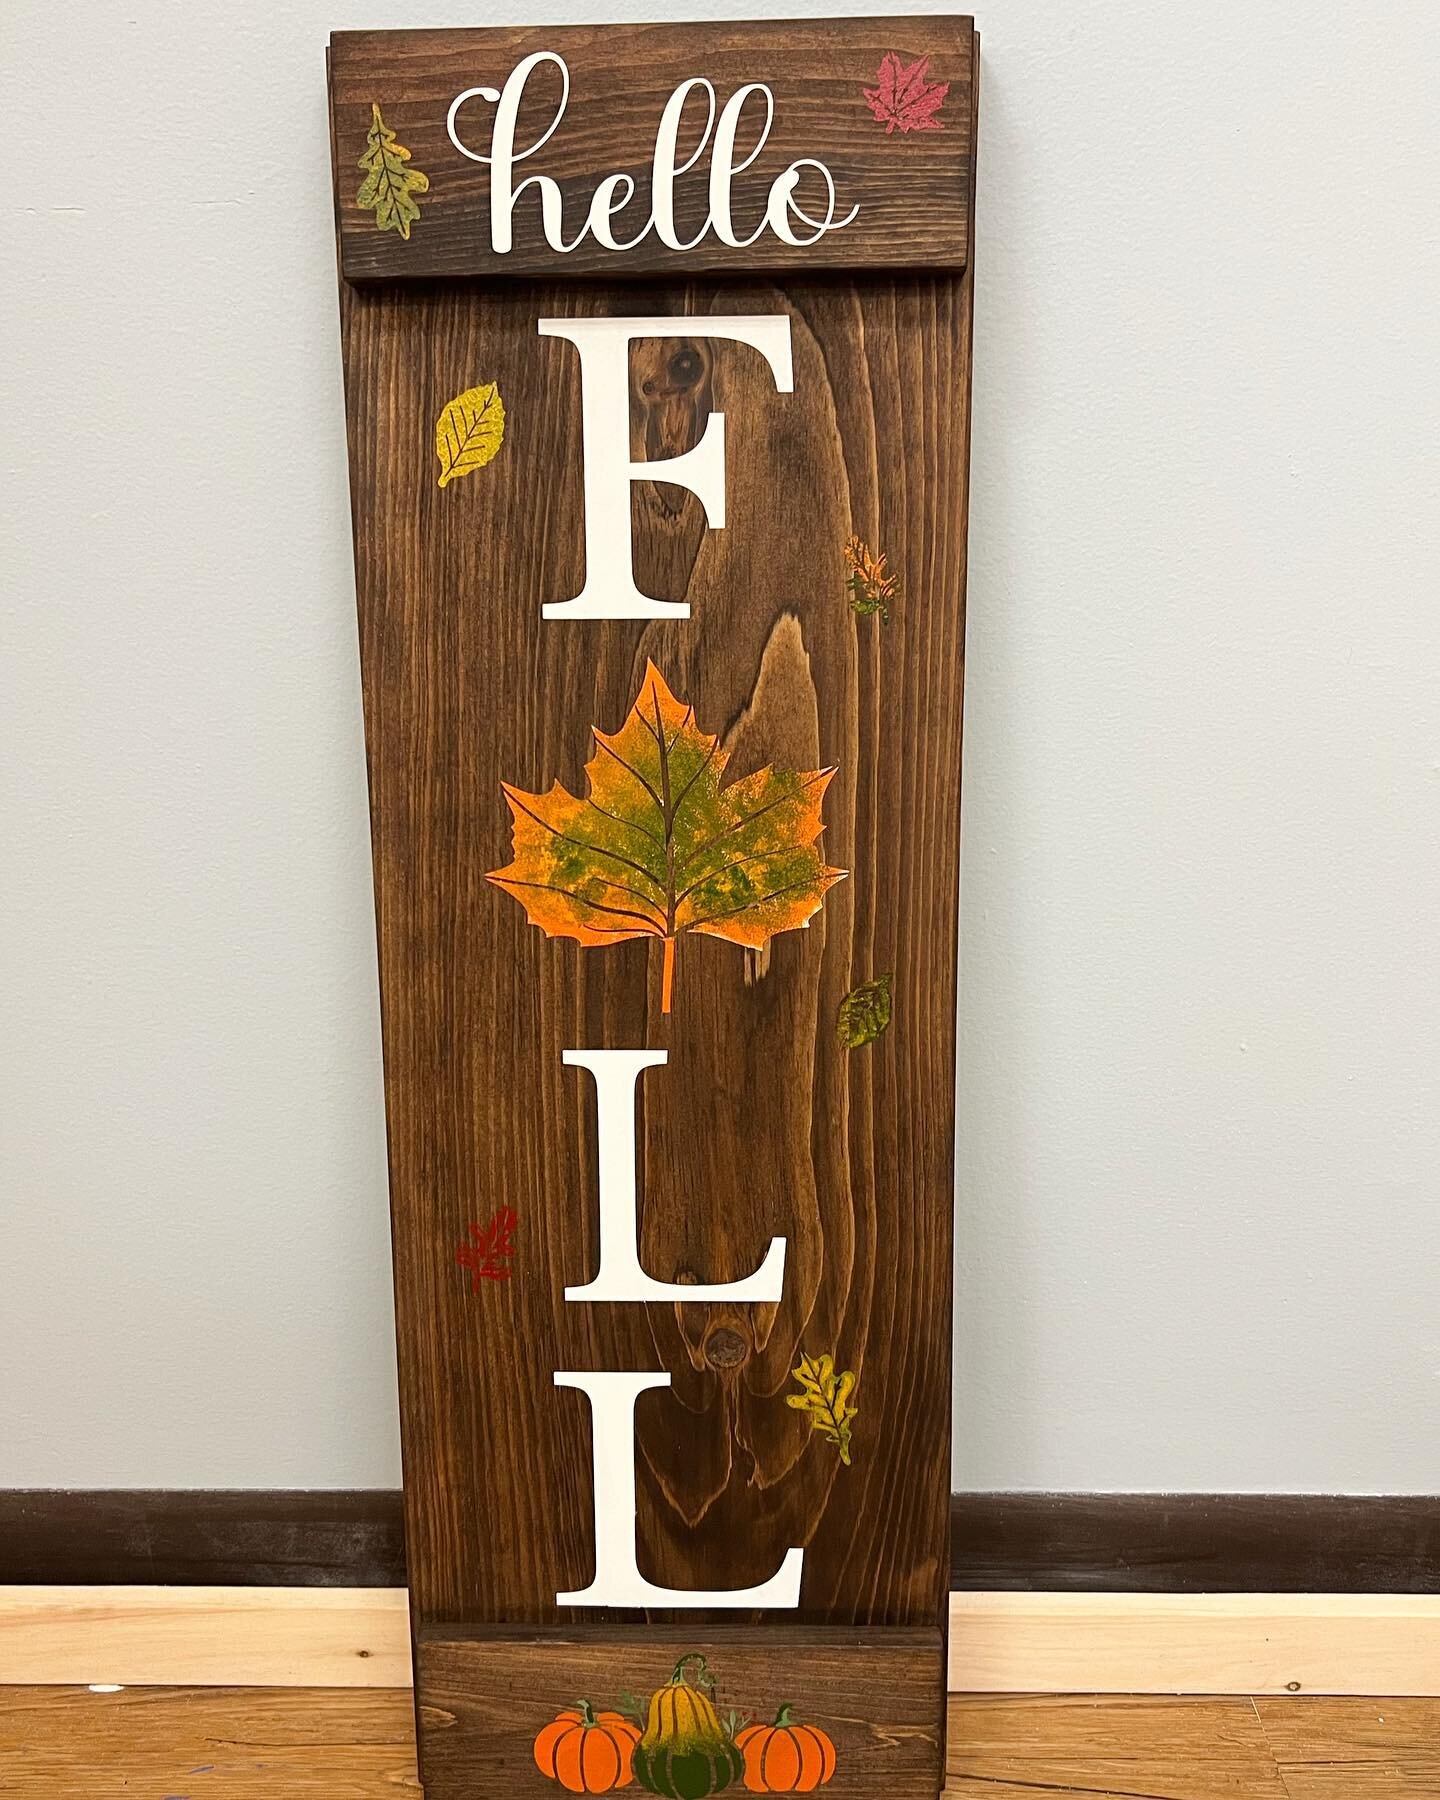 We are slowly starting to say hello to fall this year! How beautiful is this hello fall shutter sign made at a party recently!? 🍁🍂🎃 

Sign up to make your own masterpiece this fall at wordsonwood.com 

-
-
#wordsonwood #wordsonwoodus #wordsonwoodp